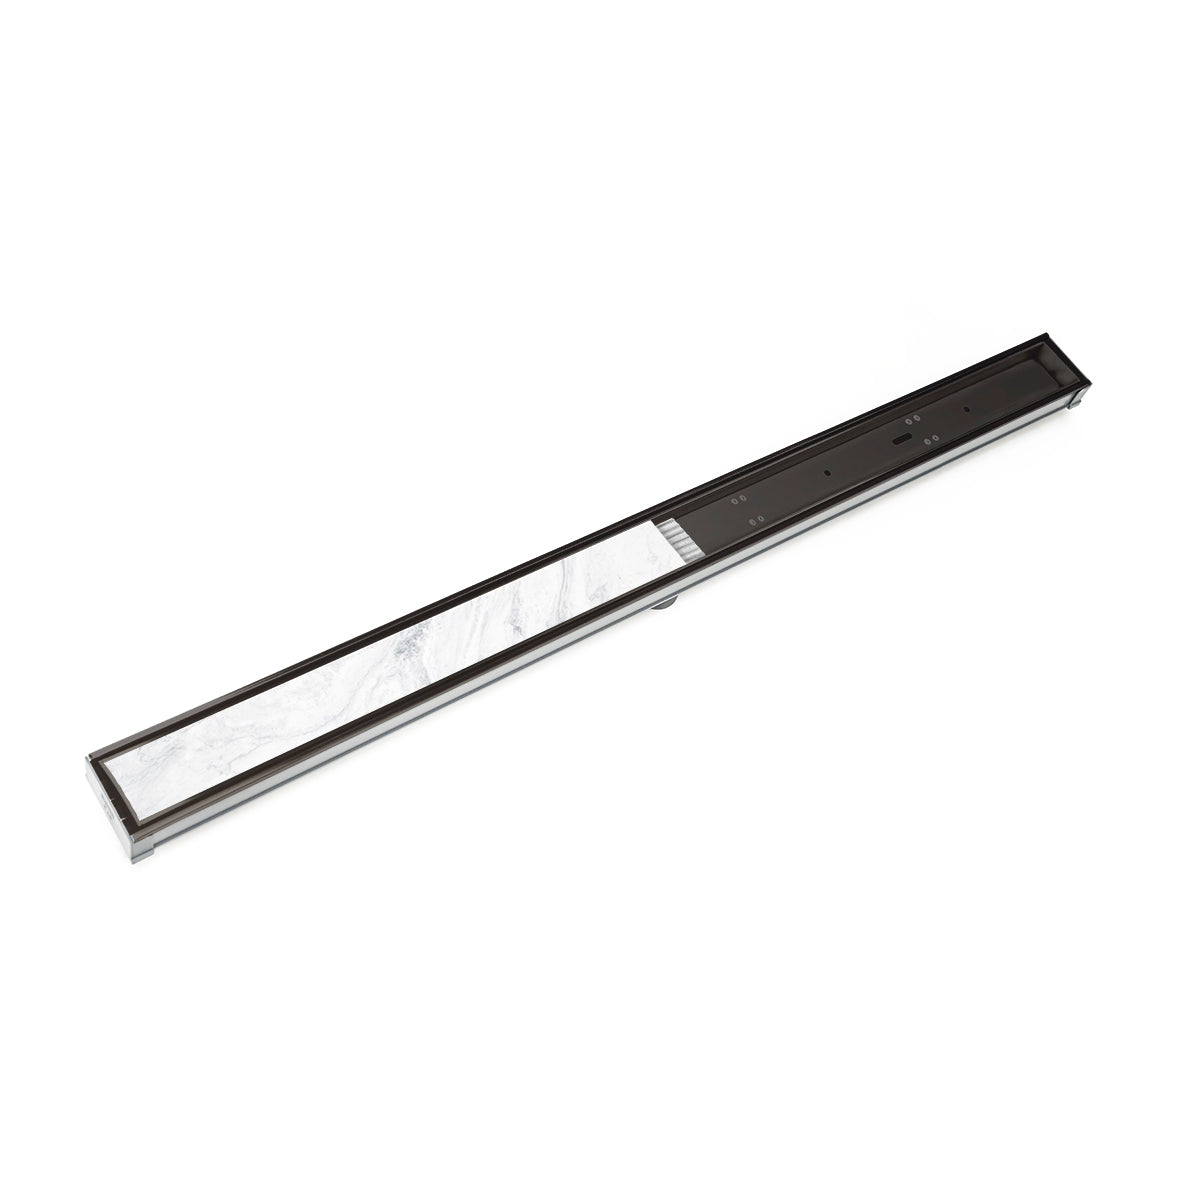 Infinity Drain 48" S-PVC Series Low Profile Site Sizable Linear Drain Kit with 2 1/2" Tile Insert Frame